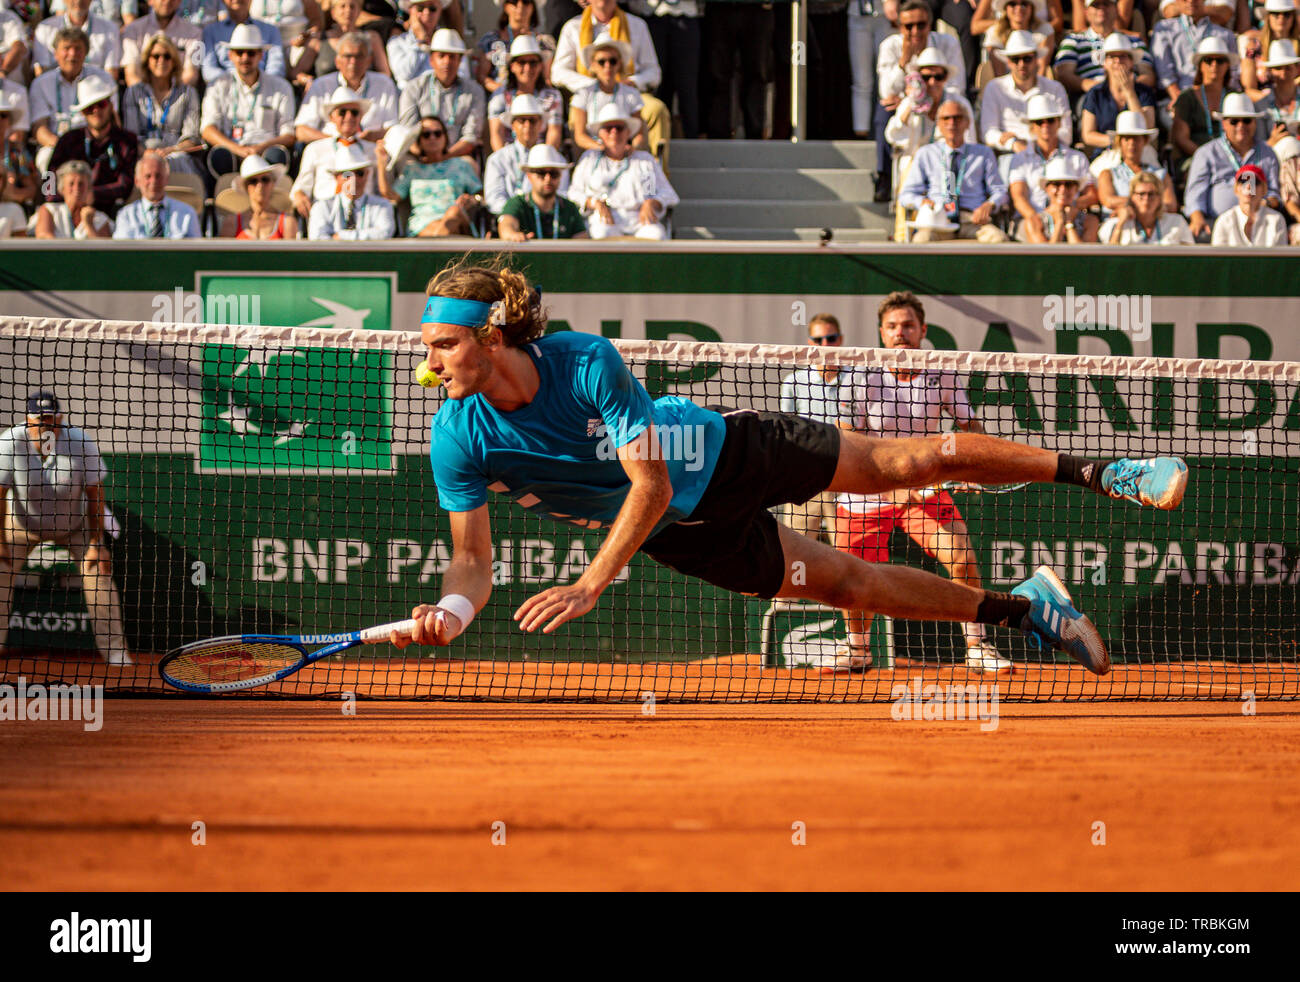 Paris, France, 2 june, 2019, Tennis, French Open, Roland Garros, Stefanos  Tsitsipas (GRE) takes a dive in his match against Wawrinka (SUI) Photo:  Henk Koster/tennisimages.com Stock Photo - Alamy